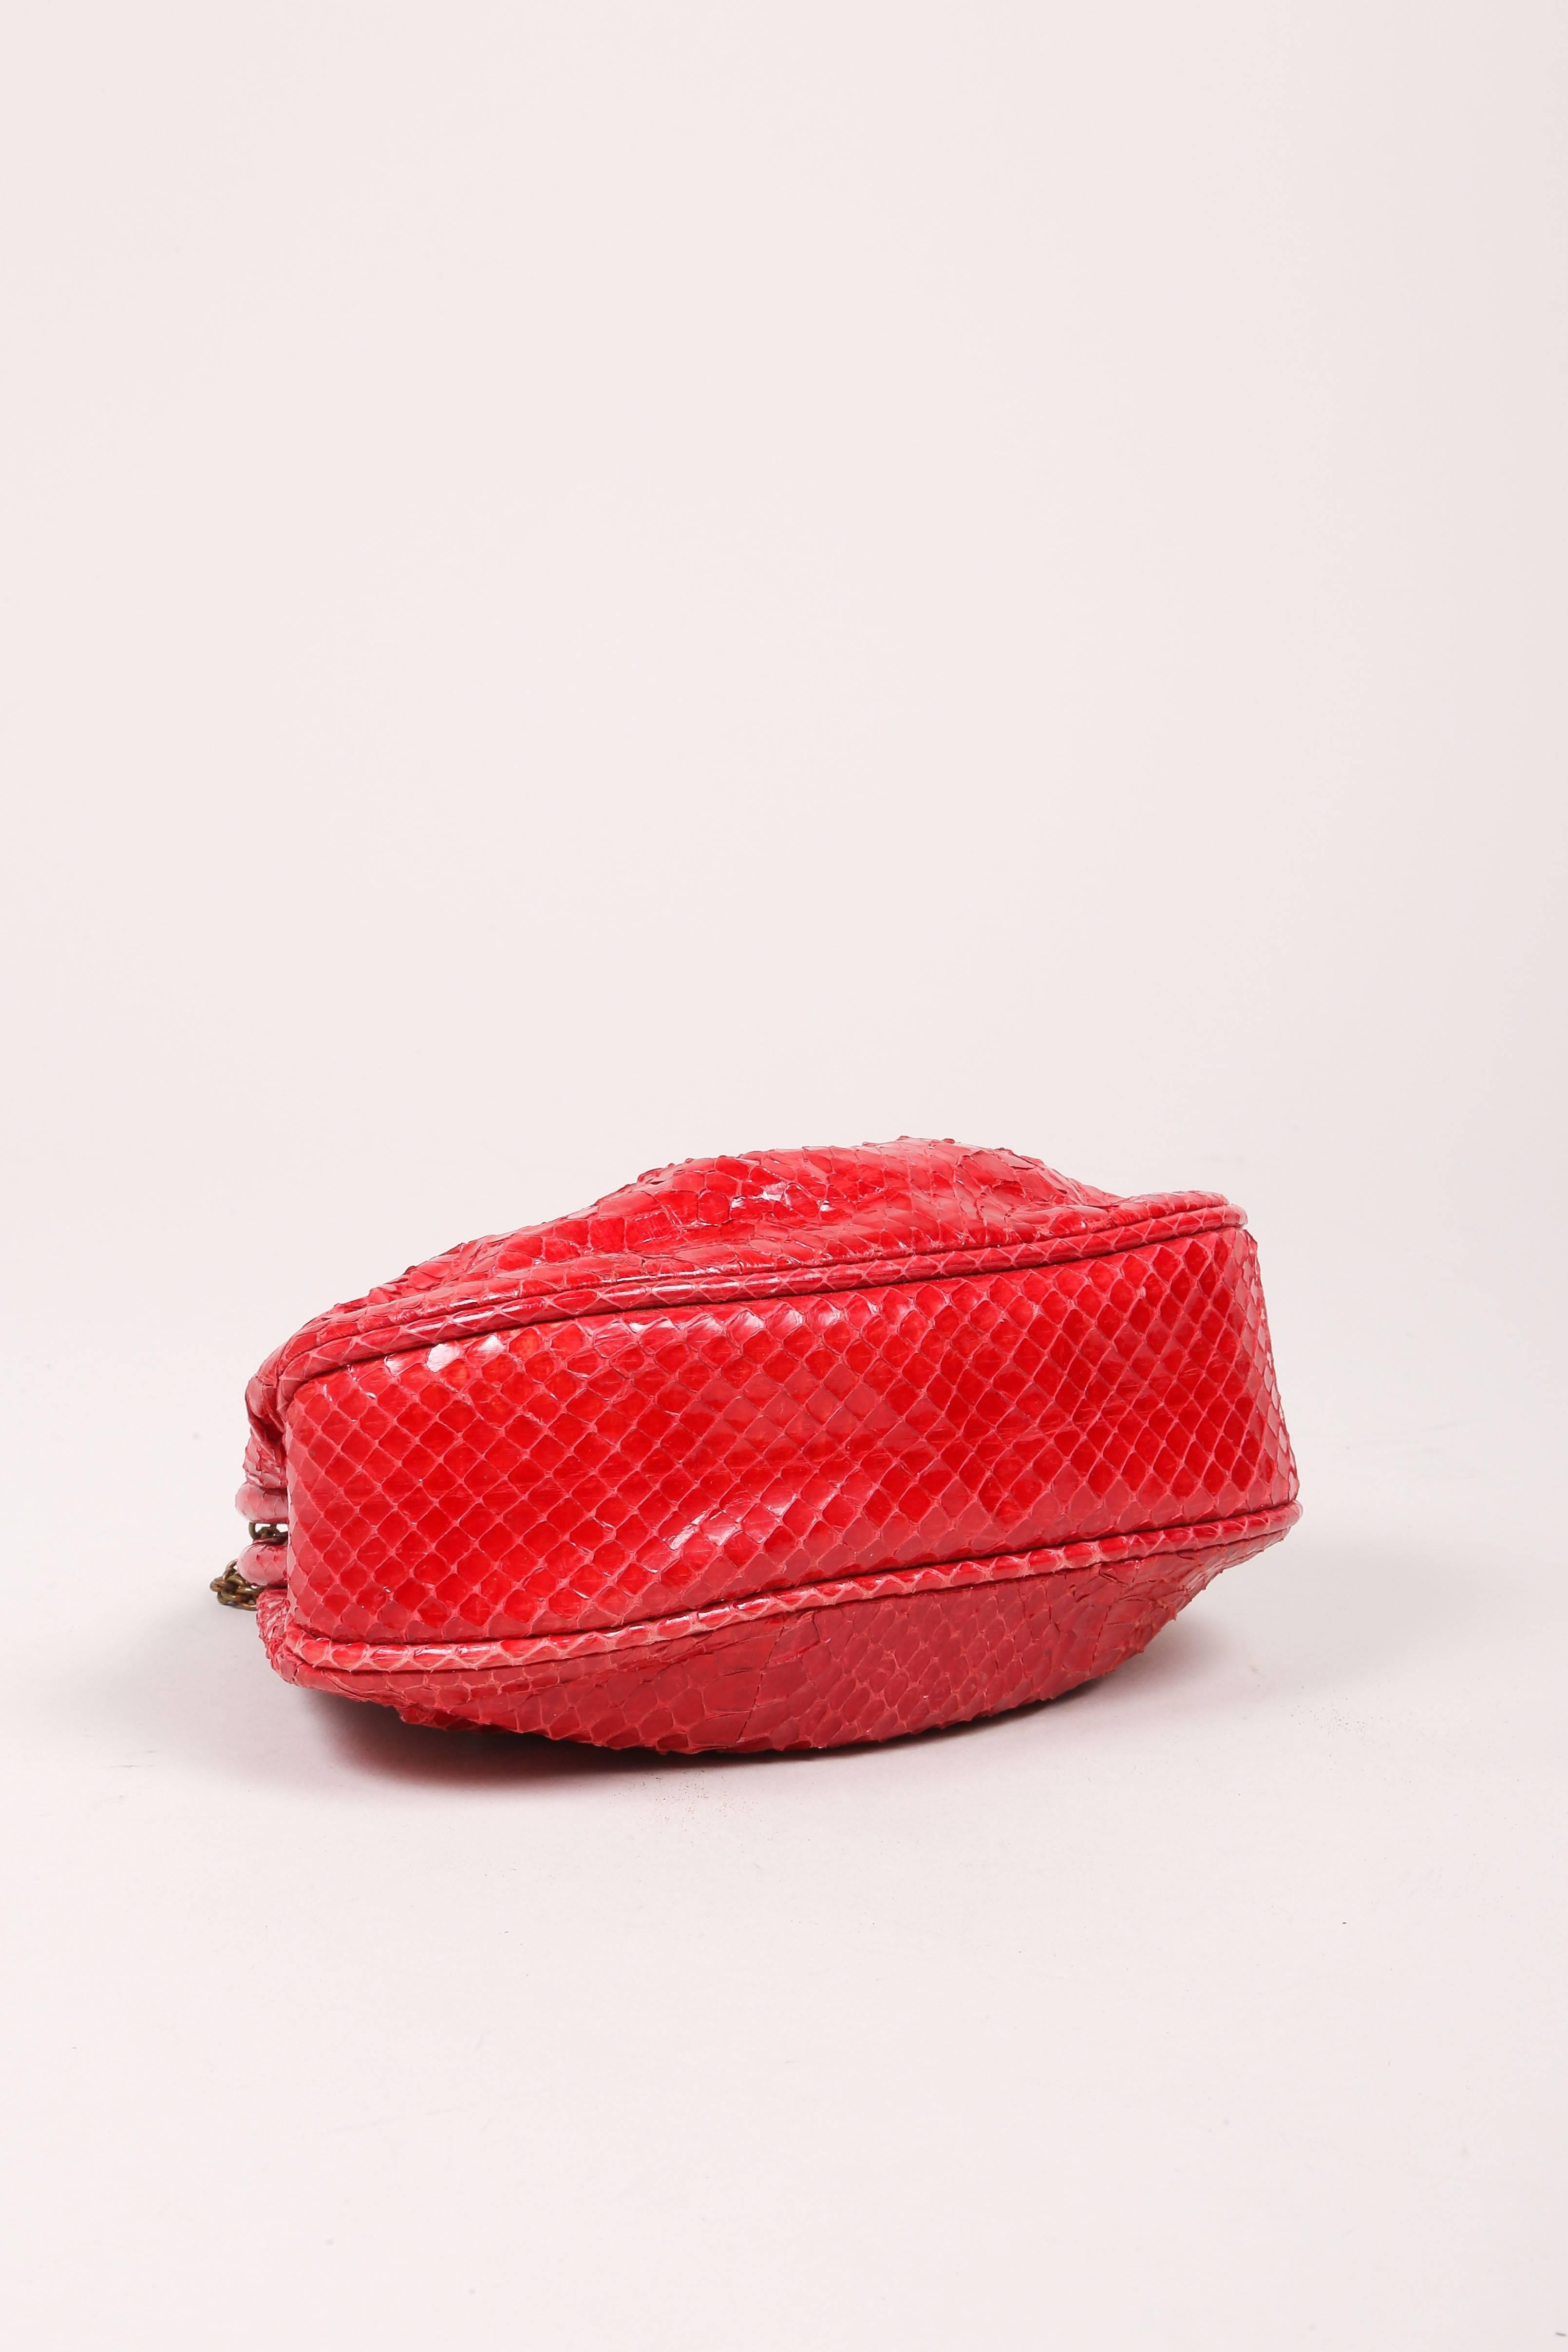 Vintage Chanel Red Python Top Snap Closure Clutch 2